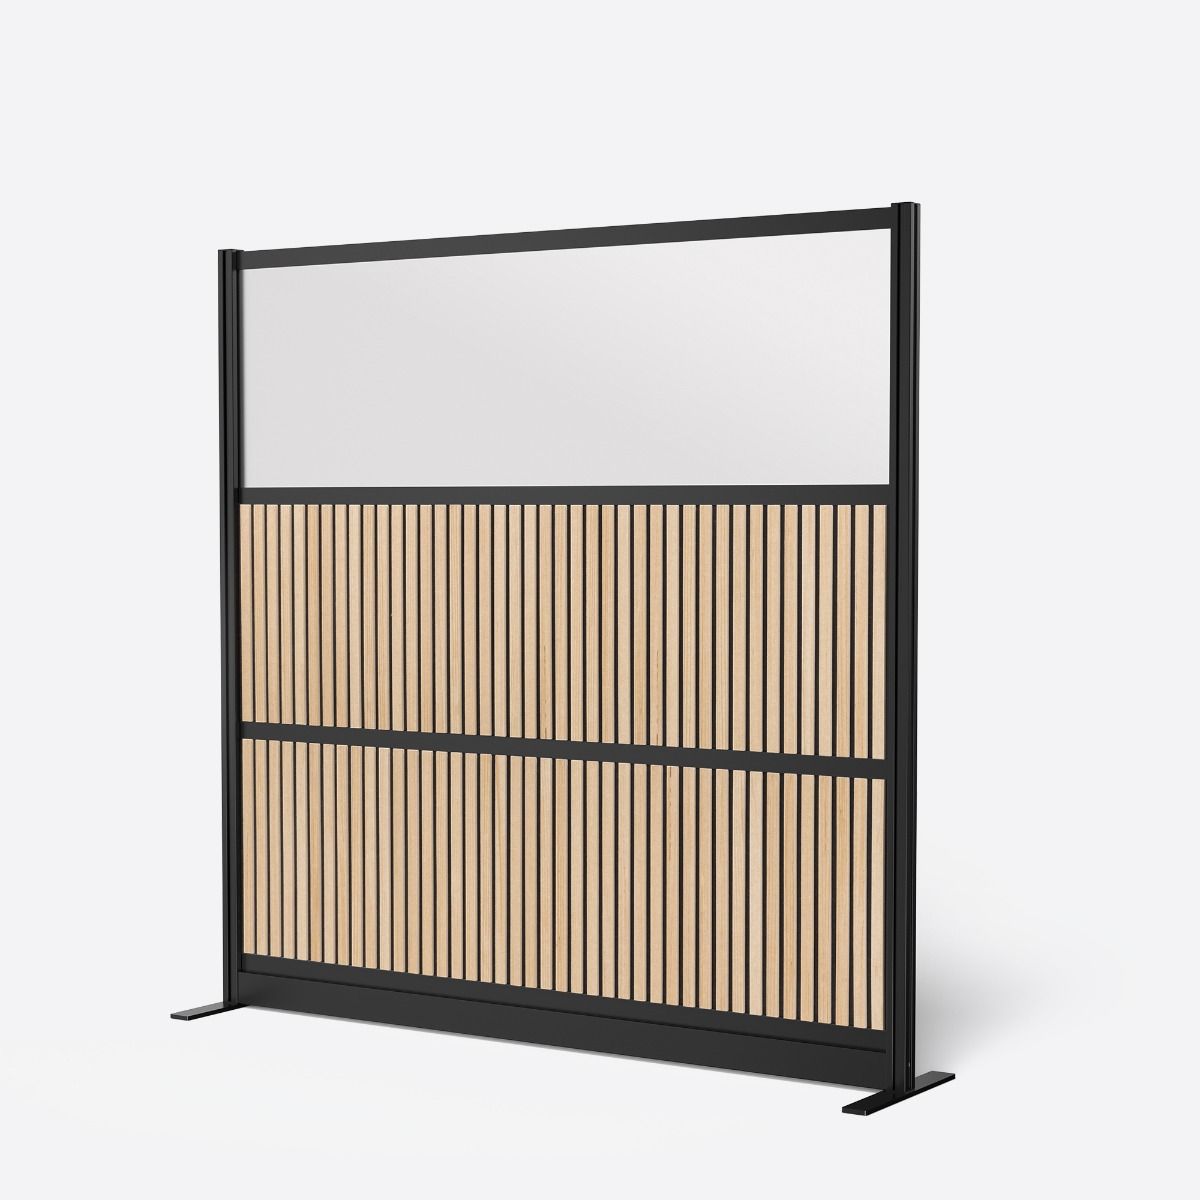 Luxor Modular Wall 70 x 70 - Wood Slats and Frosted Acrylic in Black Frame (Luxor LUX-MW-7070-WAB) - SchoolOutlet